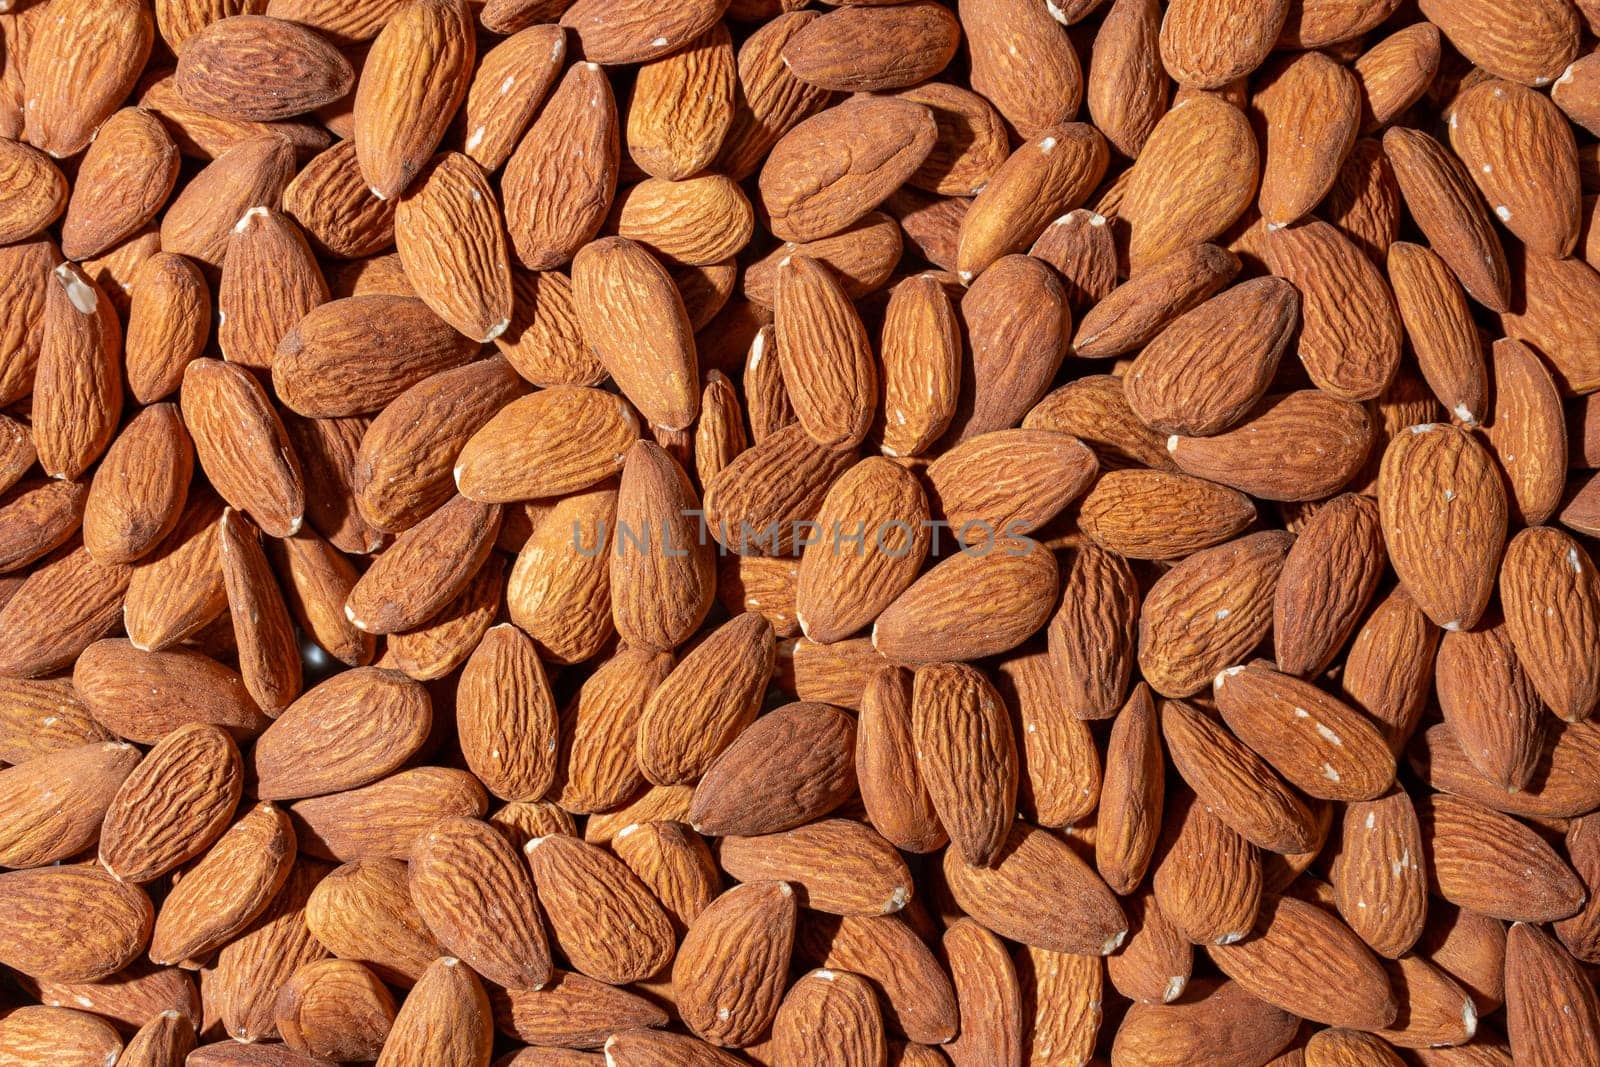 Scattered Almonds. Background from Almond Nuts. Natural High-Calorie Snacks